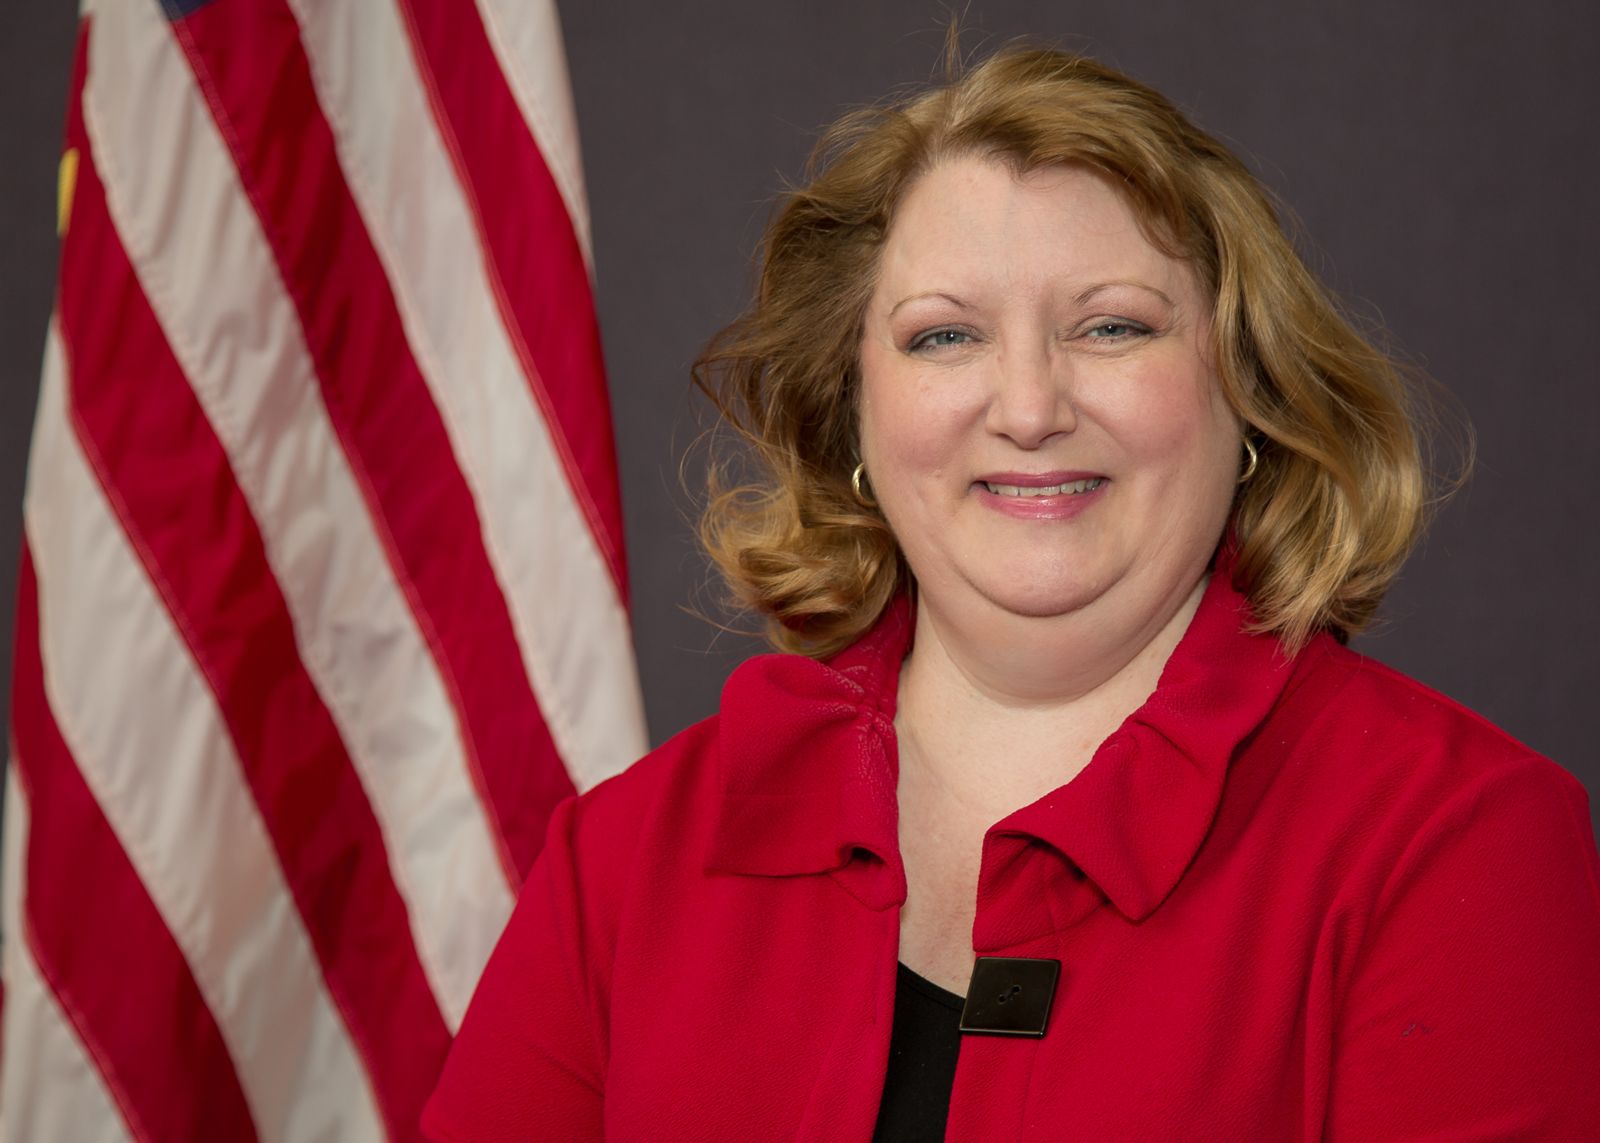 A blonde, white caucasian, Gena Sapp, is wearing a bright red collared jacket over a black shirt and is pictured with the United States flag standing in the back left against a grey background.